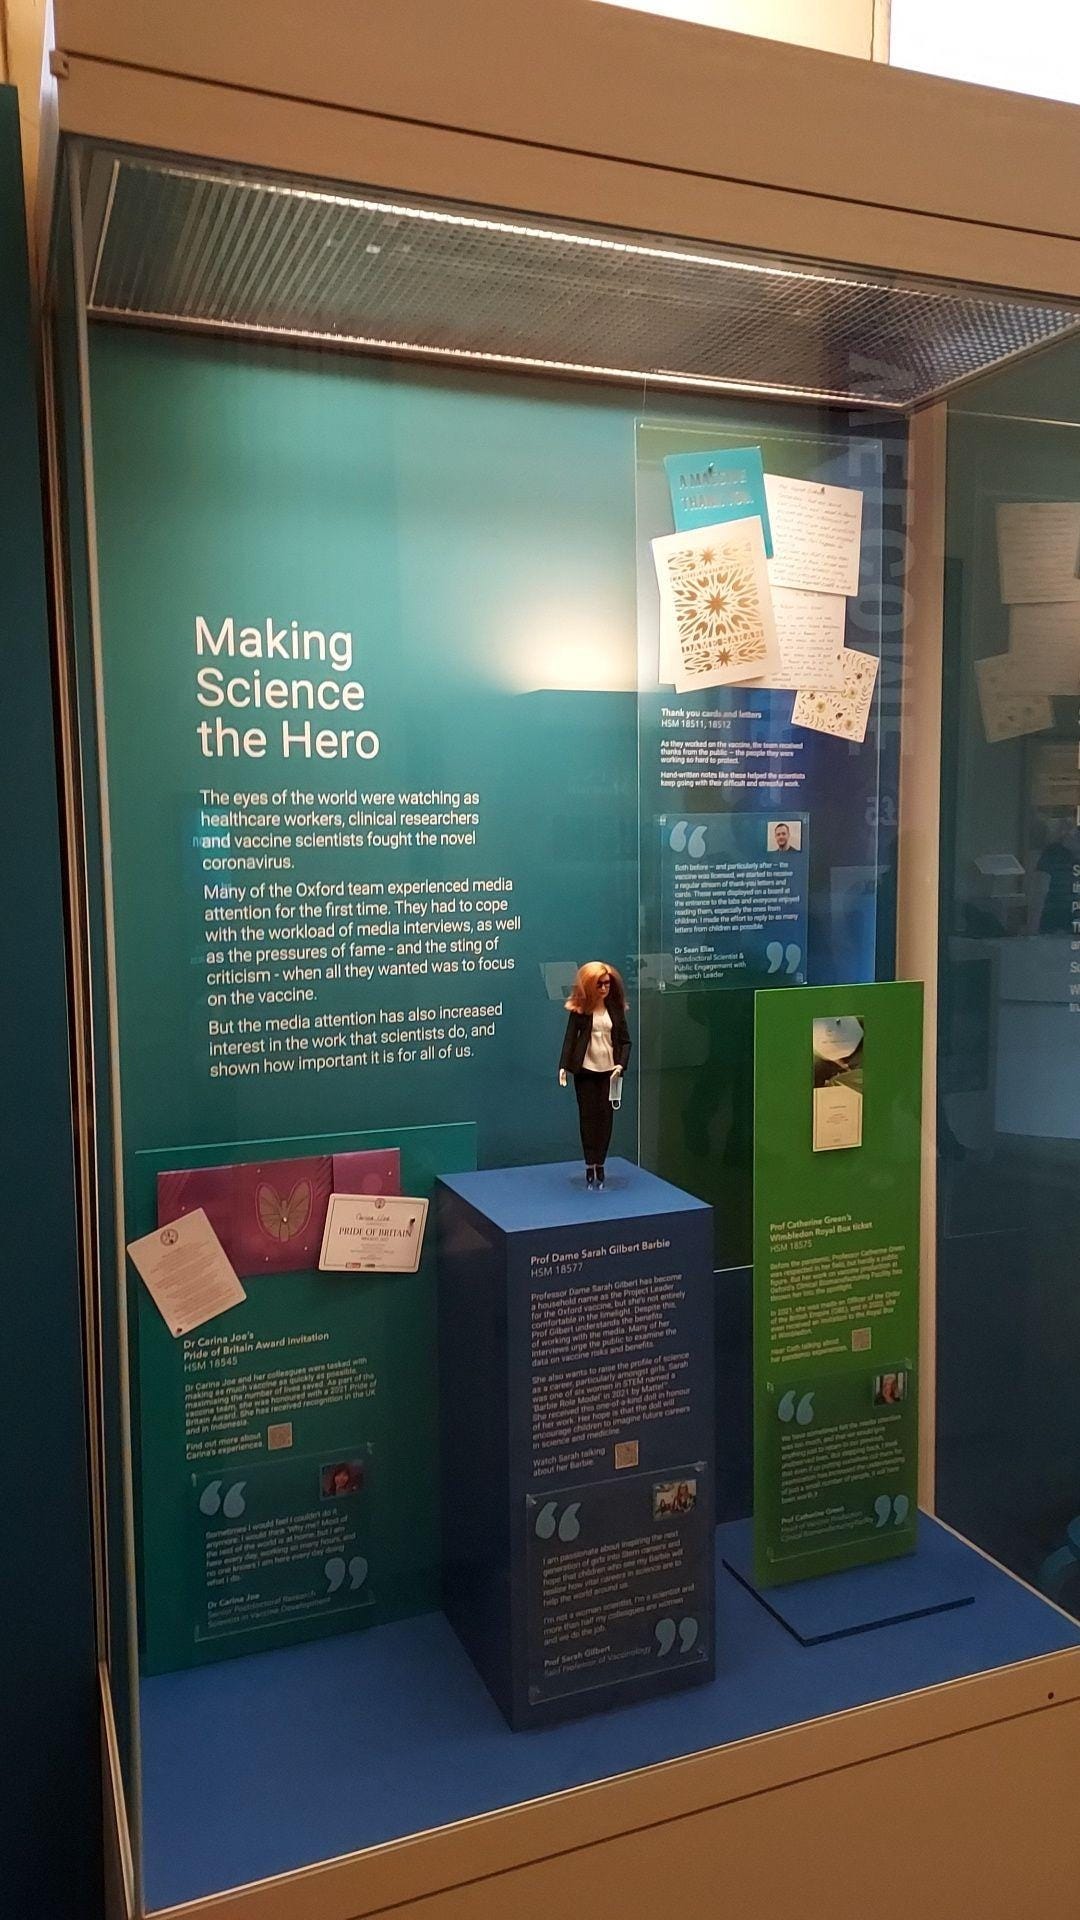 A display unit featuring Kate and science as heroes